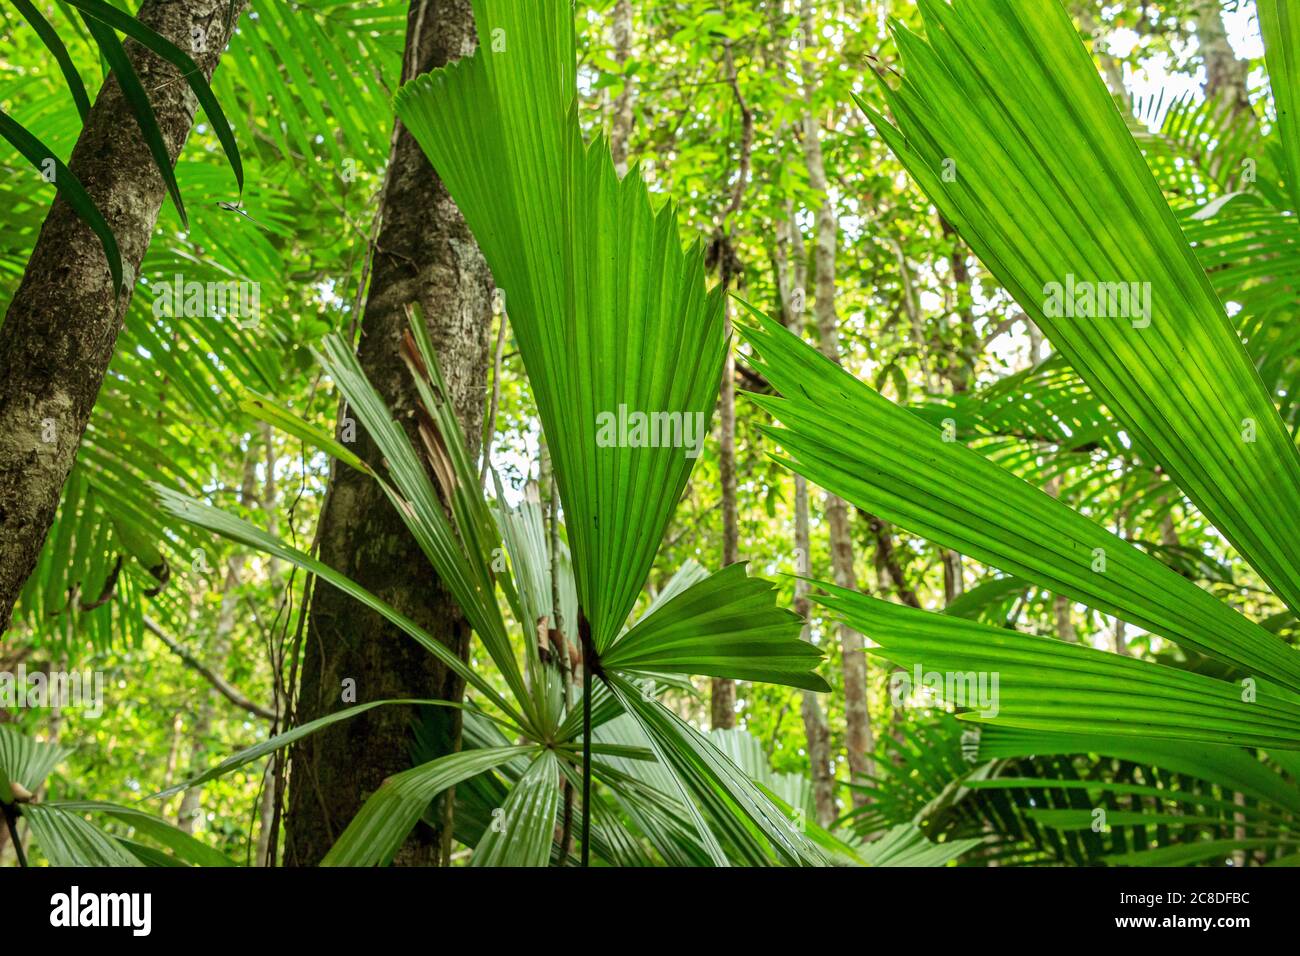 Large green leafs in palm trees jungle simple picture Stock Photo